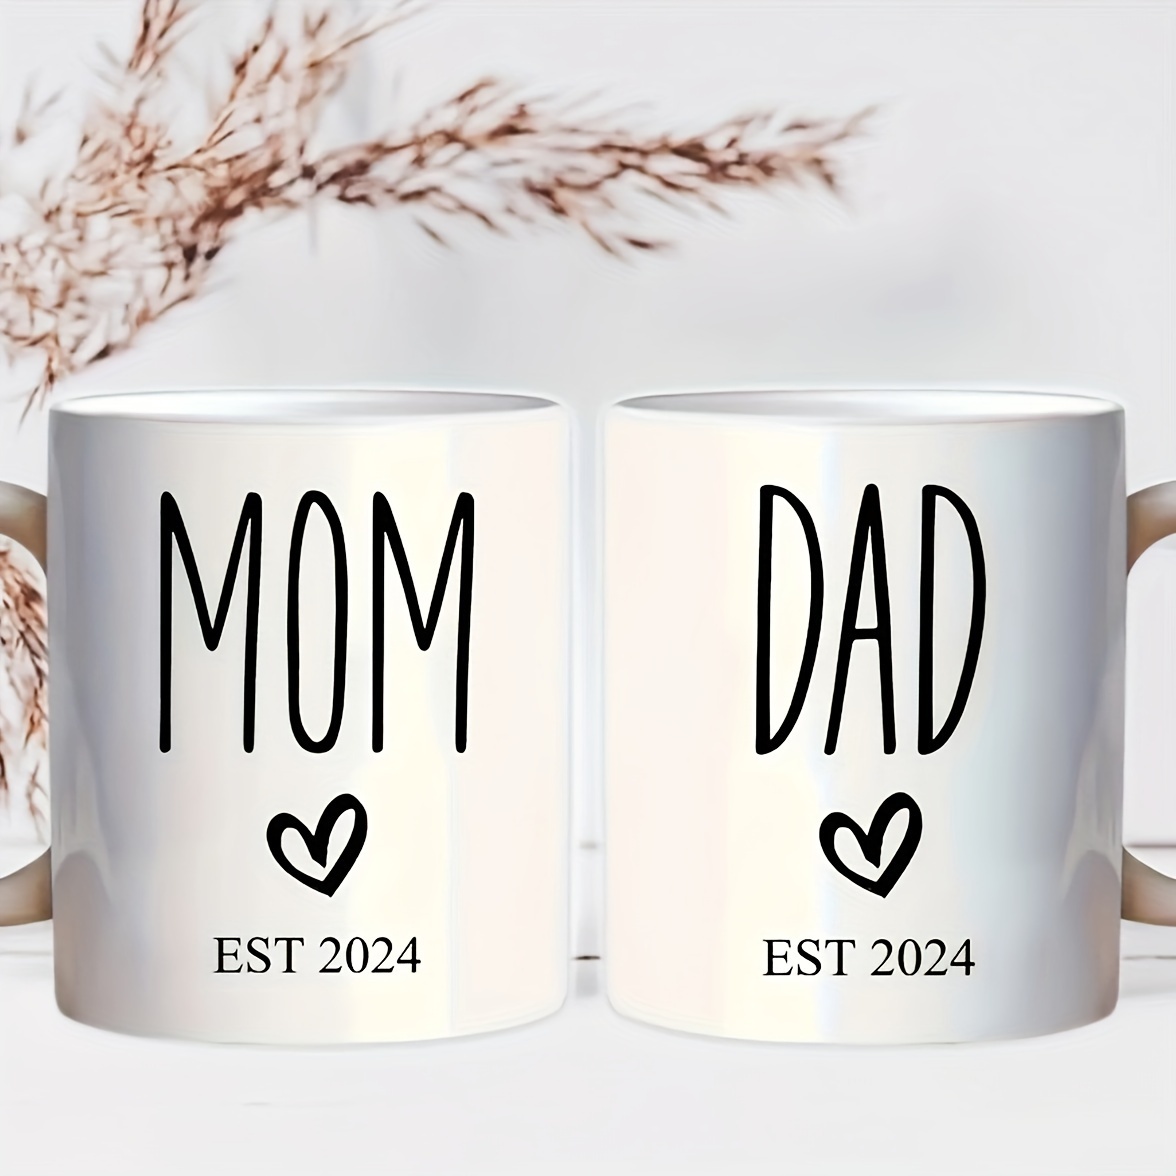 Pregnancy Gifts for New Parents Est 2024- New Mom Gifts Basket for  Pregnancy Announcement, Baby Shower - Mom & Dad Mugs, Decision Coin,  Ultrasound